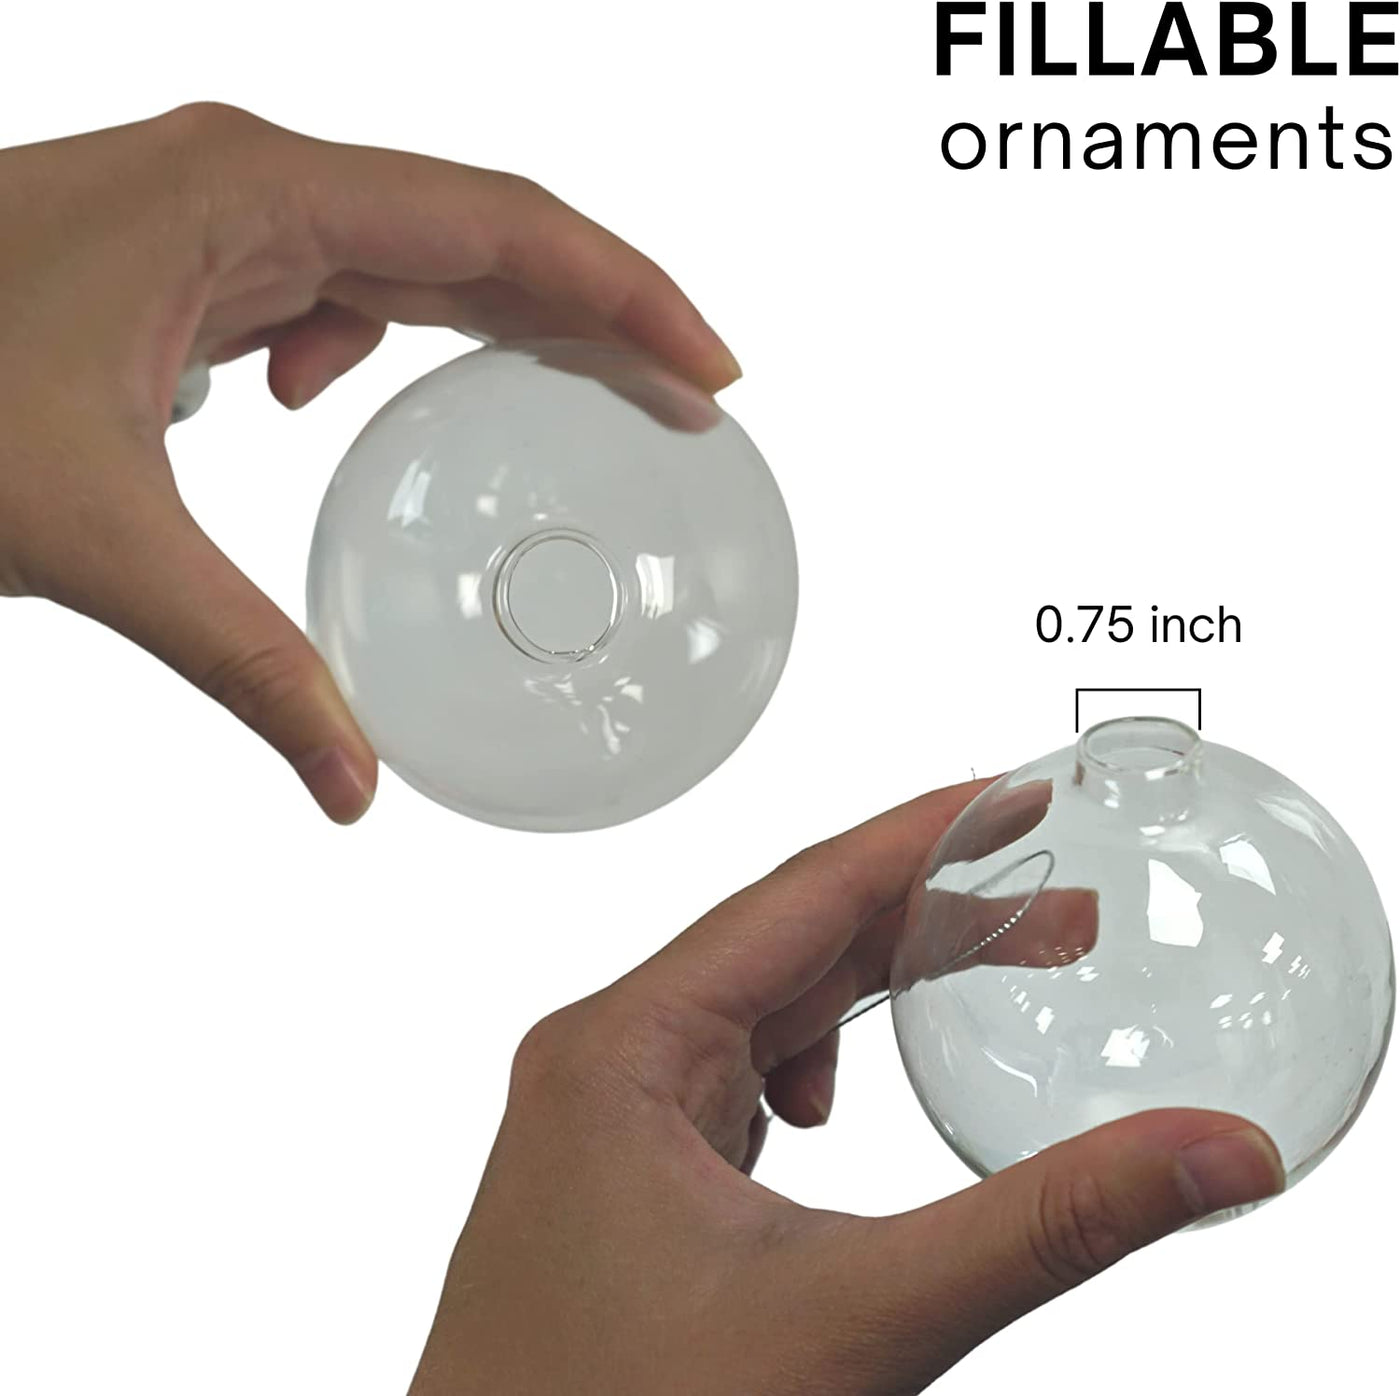 Clear Plastic Ball Ornaments for Crafts Fillable - 12 Pack Bulk, 80mm 3.15" Transparent Shatterproof Fillable Christmas Ornaments for DIY Crafts by 4E's Novelty